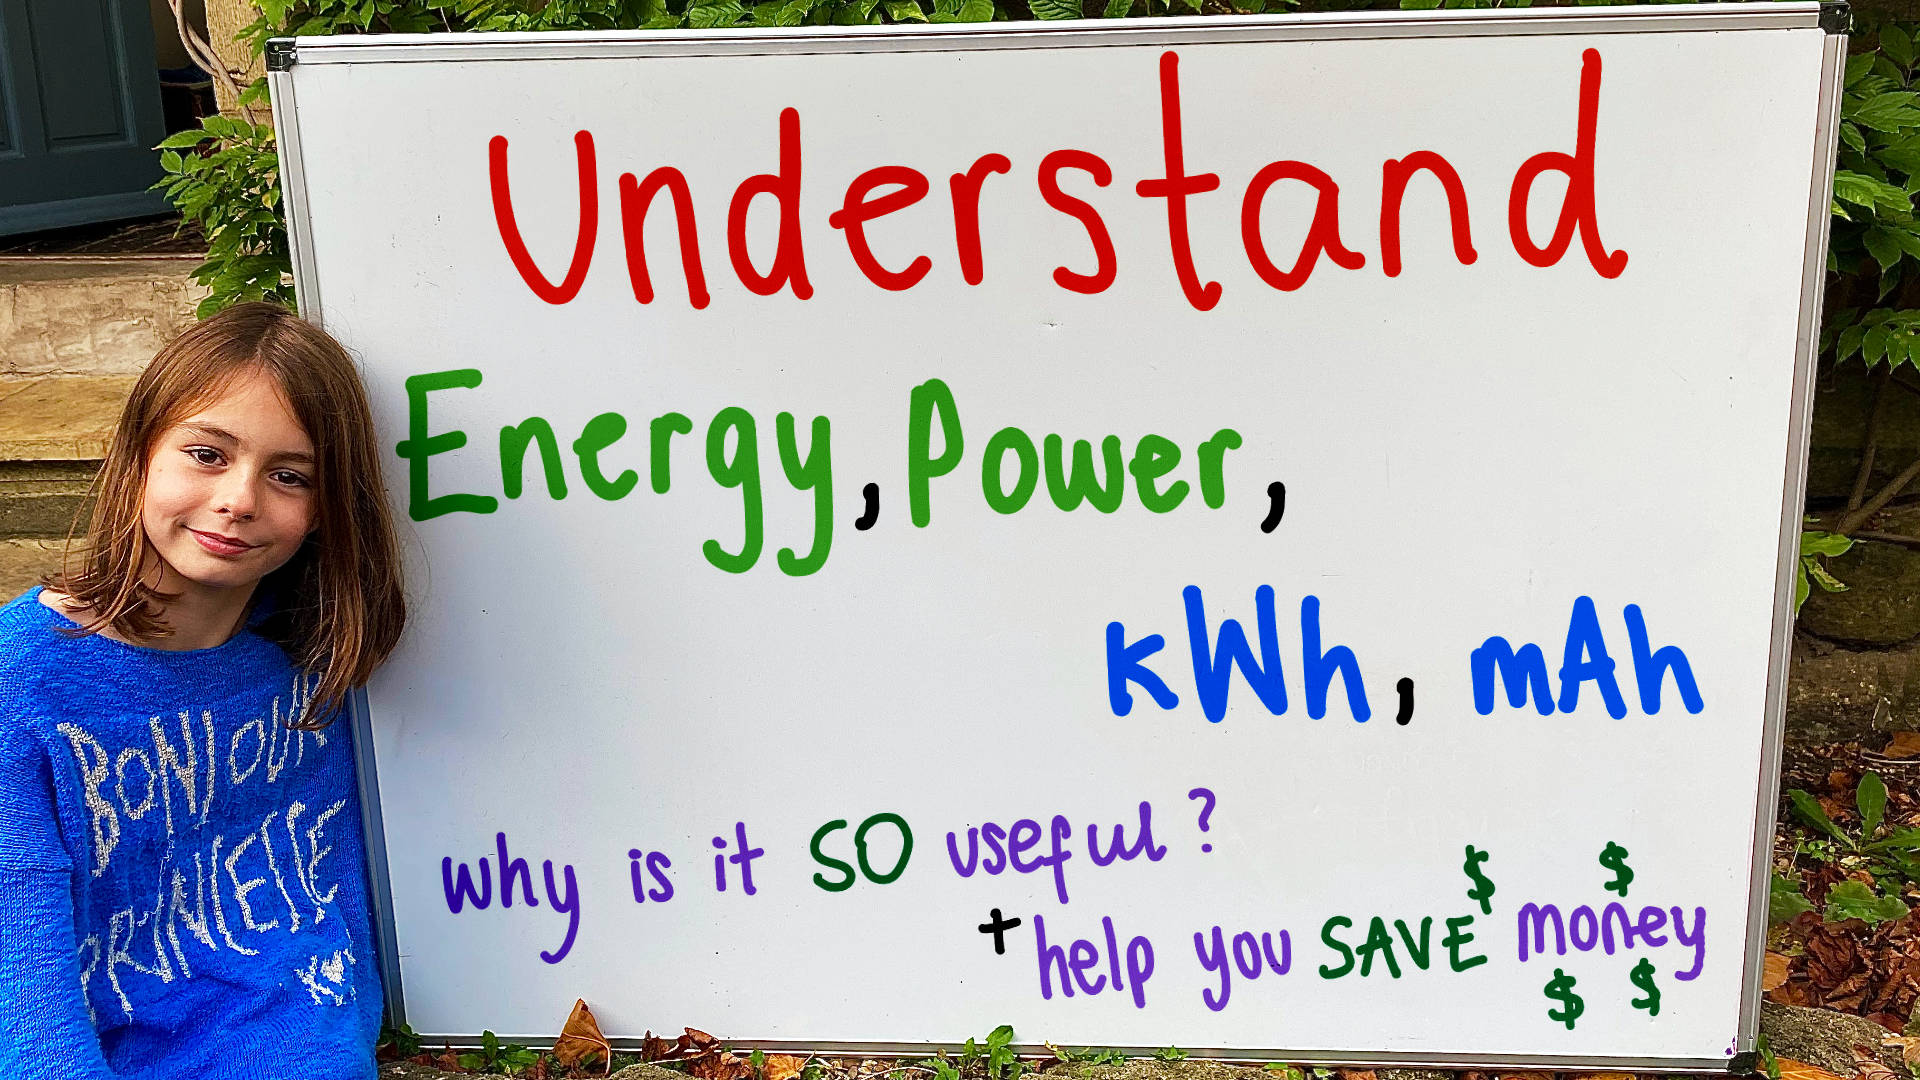 energy and power kWh mAh on a whiteboard